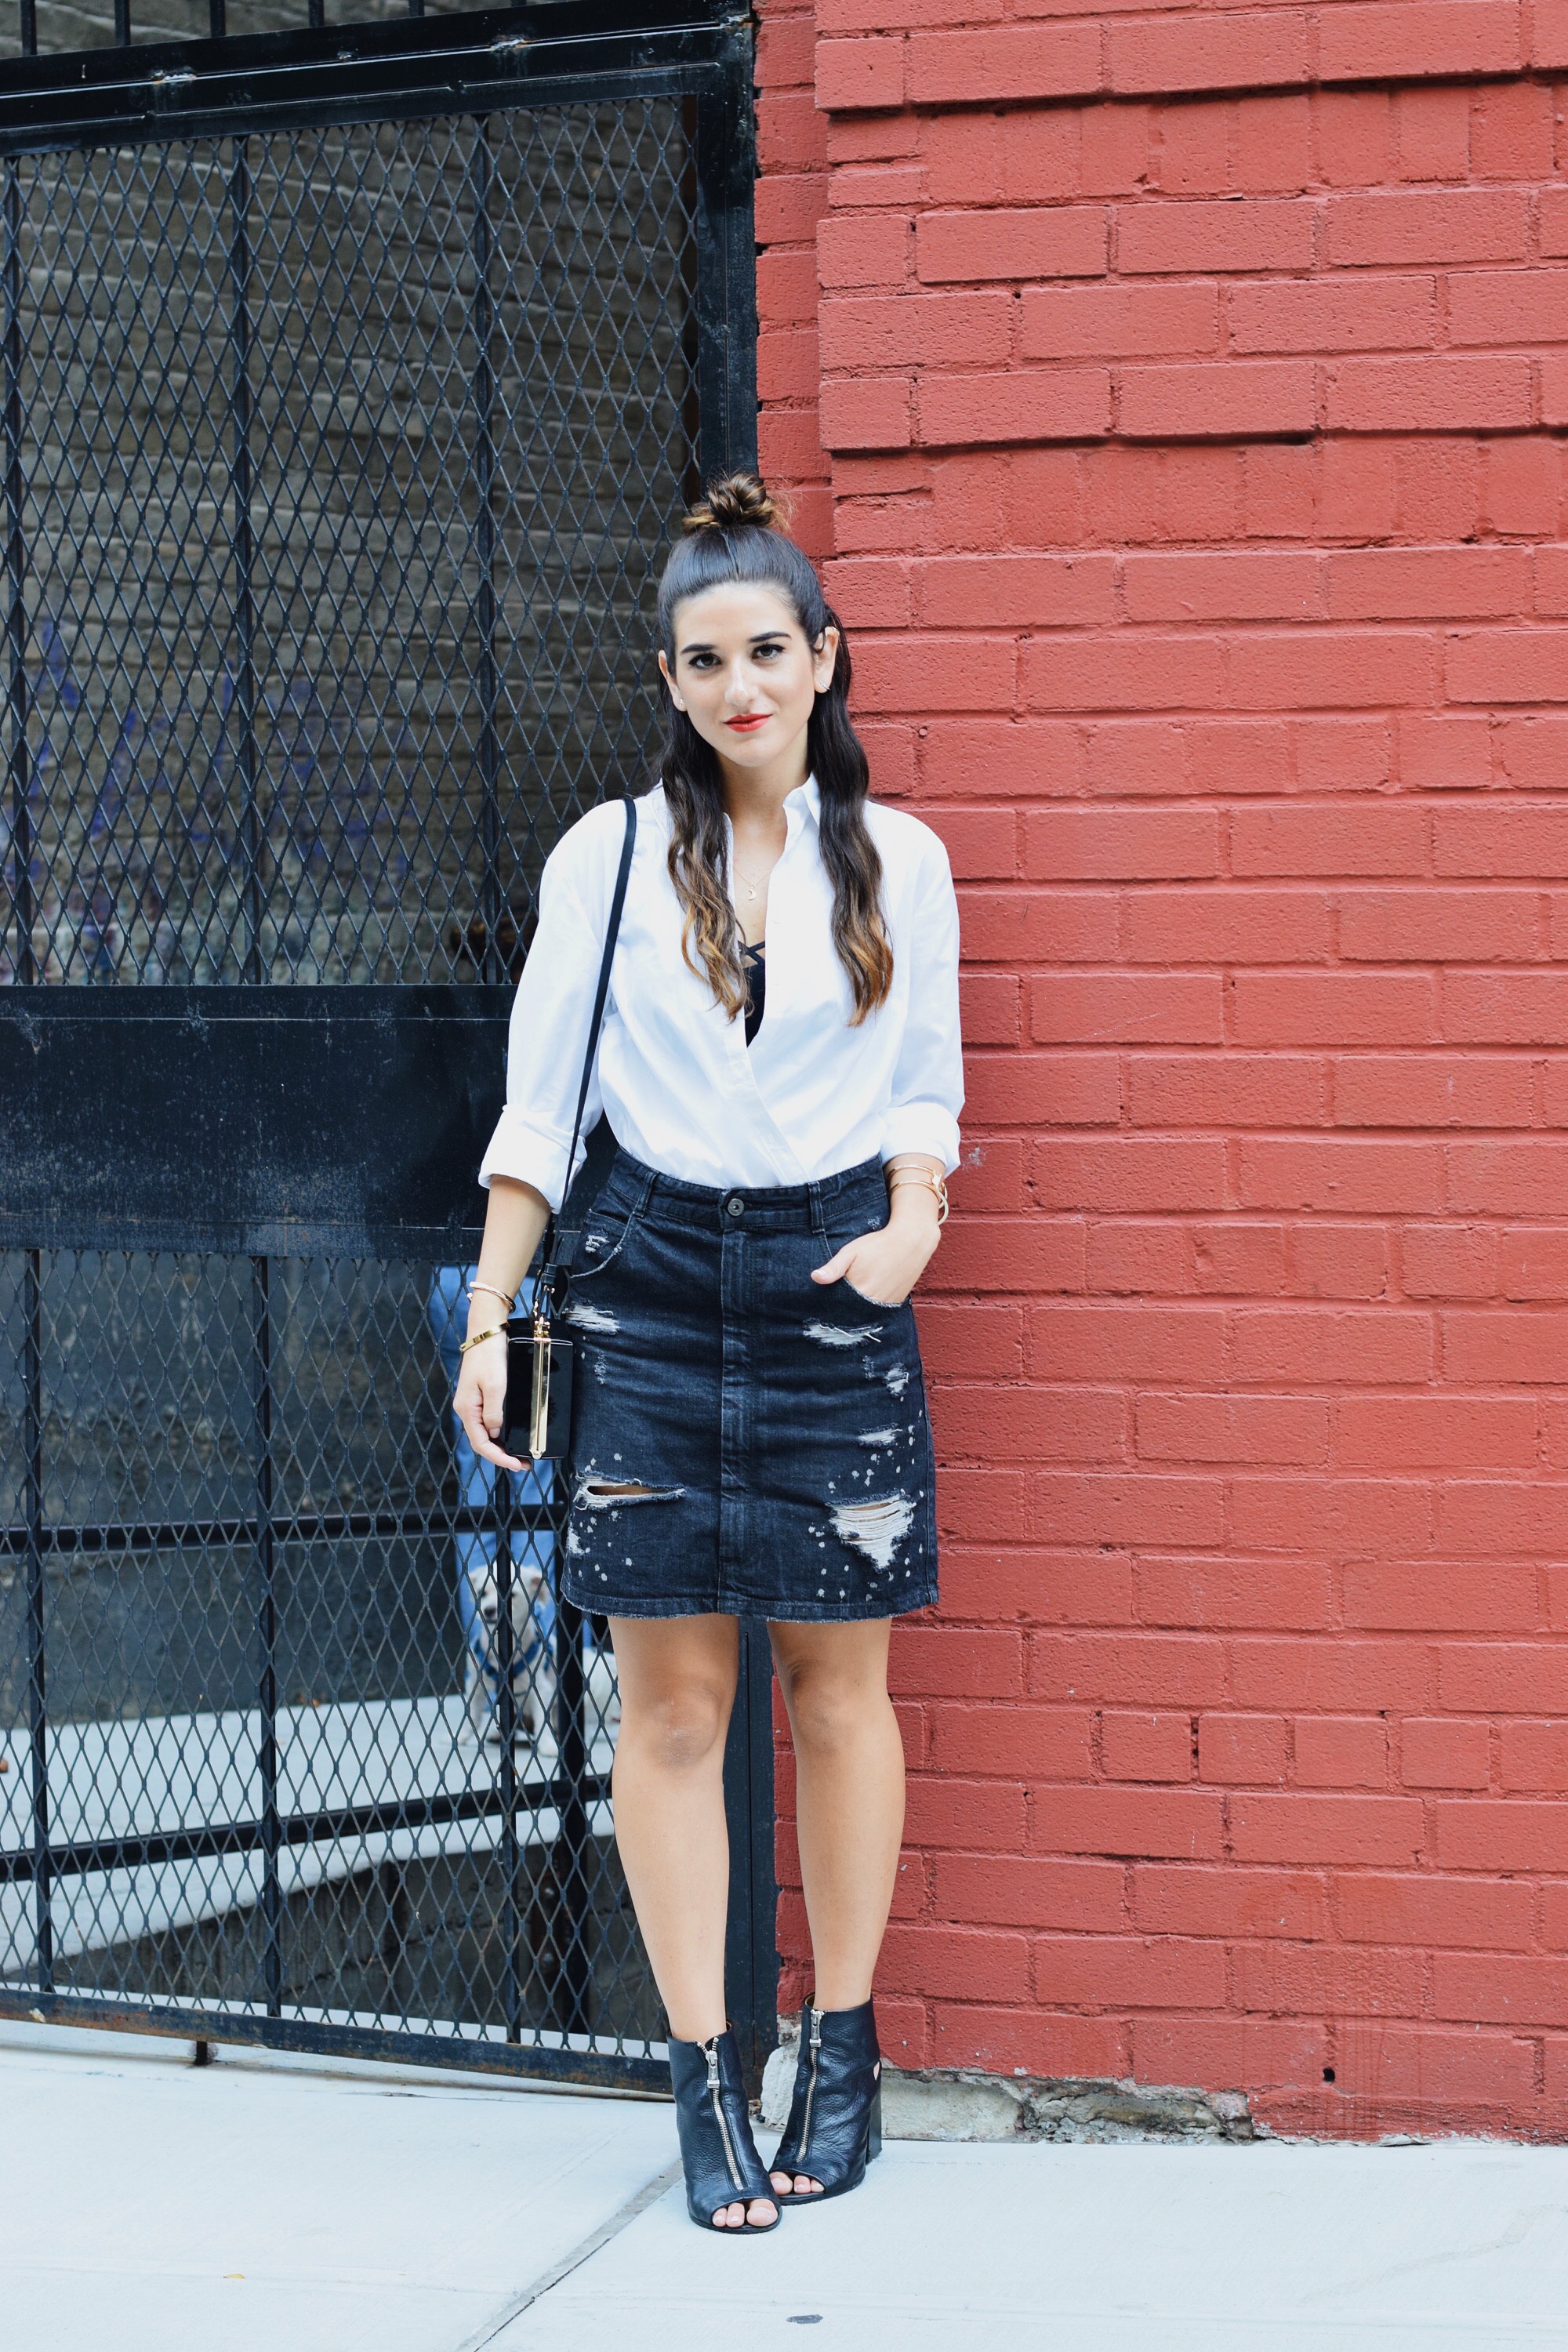 Coco & Marie Moon Necklace Giveaway Louboutins & Love Fashion Blog Esther Santer NYC Street Style Blogger Lifestyle Topknot Bun Denim Ripped Jean Skirt White Button Down Zara Black Box Clutch Bag Nordstrom Booties Bralette Women Girl Hair Gold Jewelry.JPG